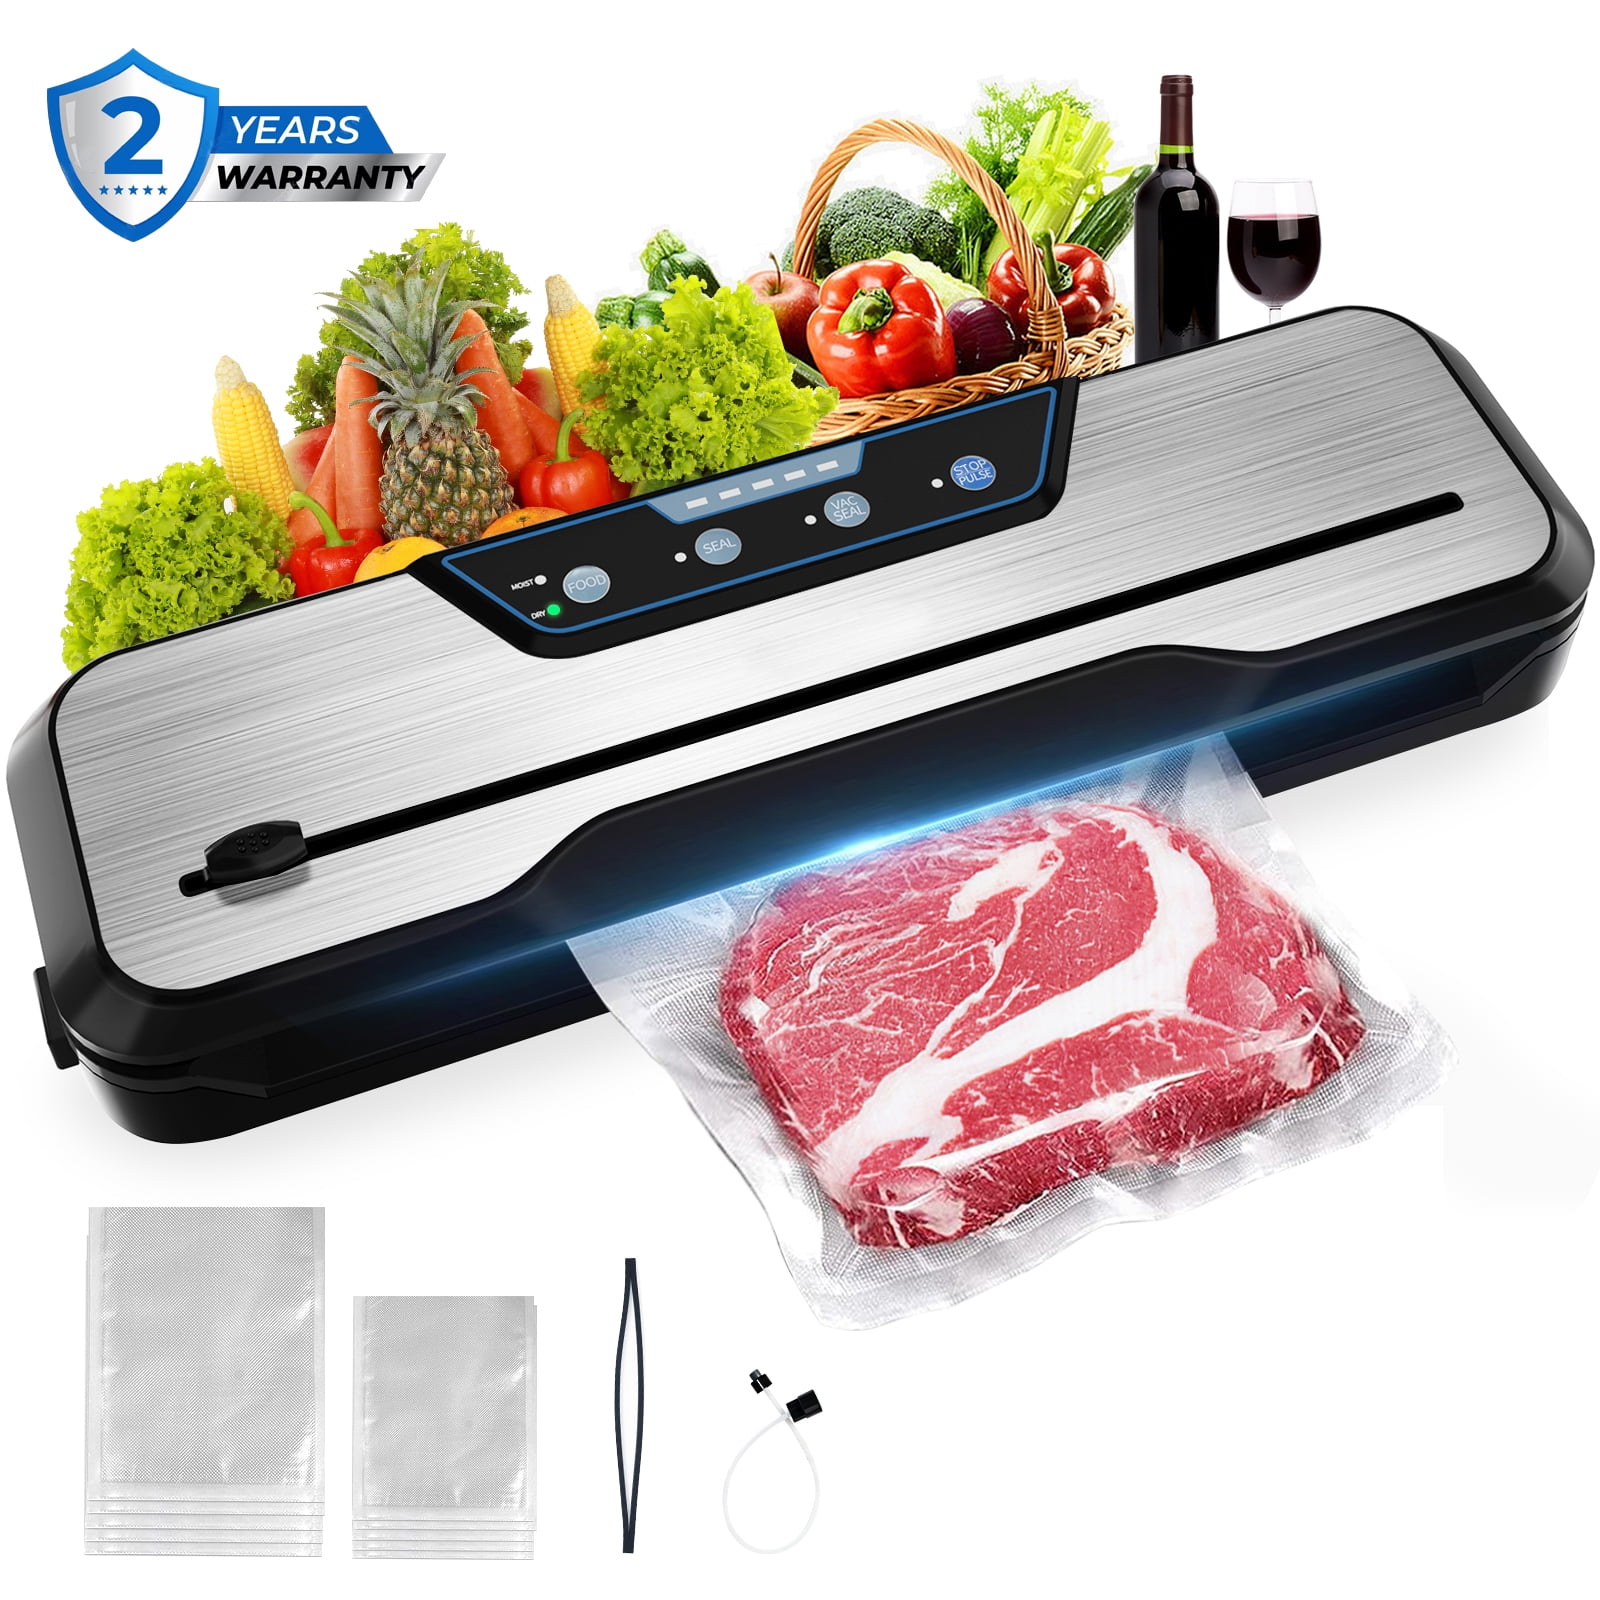 Vacuum Sealer Machine with 55 Count 8x12 Food Sealers Bags and 8*79'  Vacuum Sealer Roll, Inkbird Automatic Vacuum Sealers Machine with Built-in